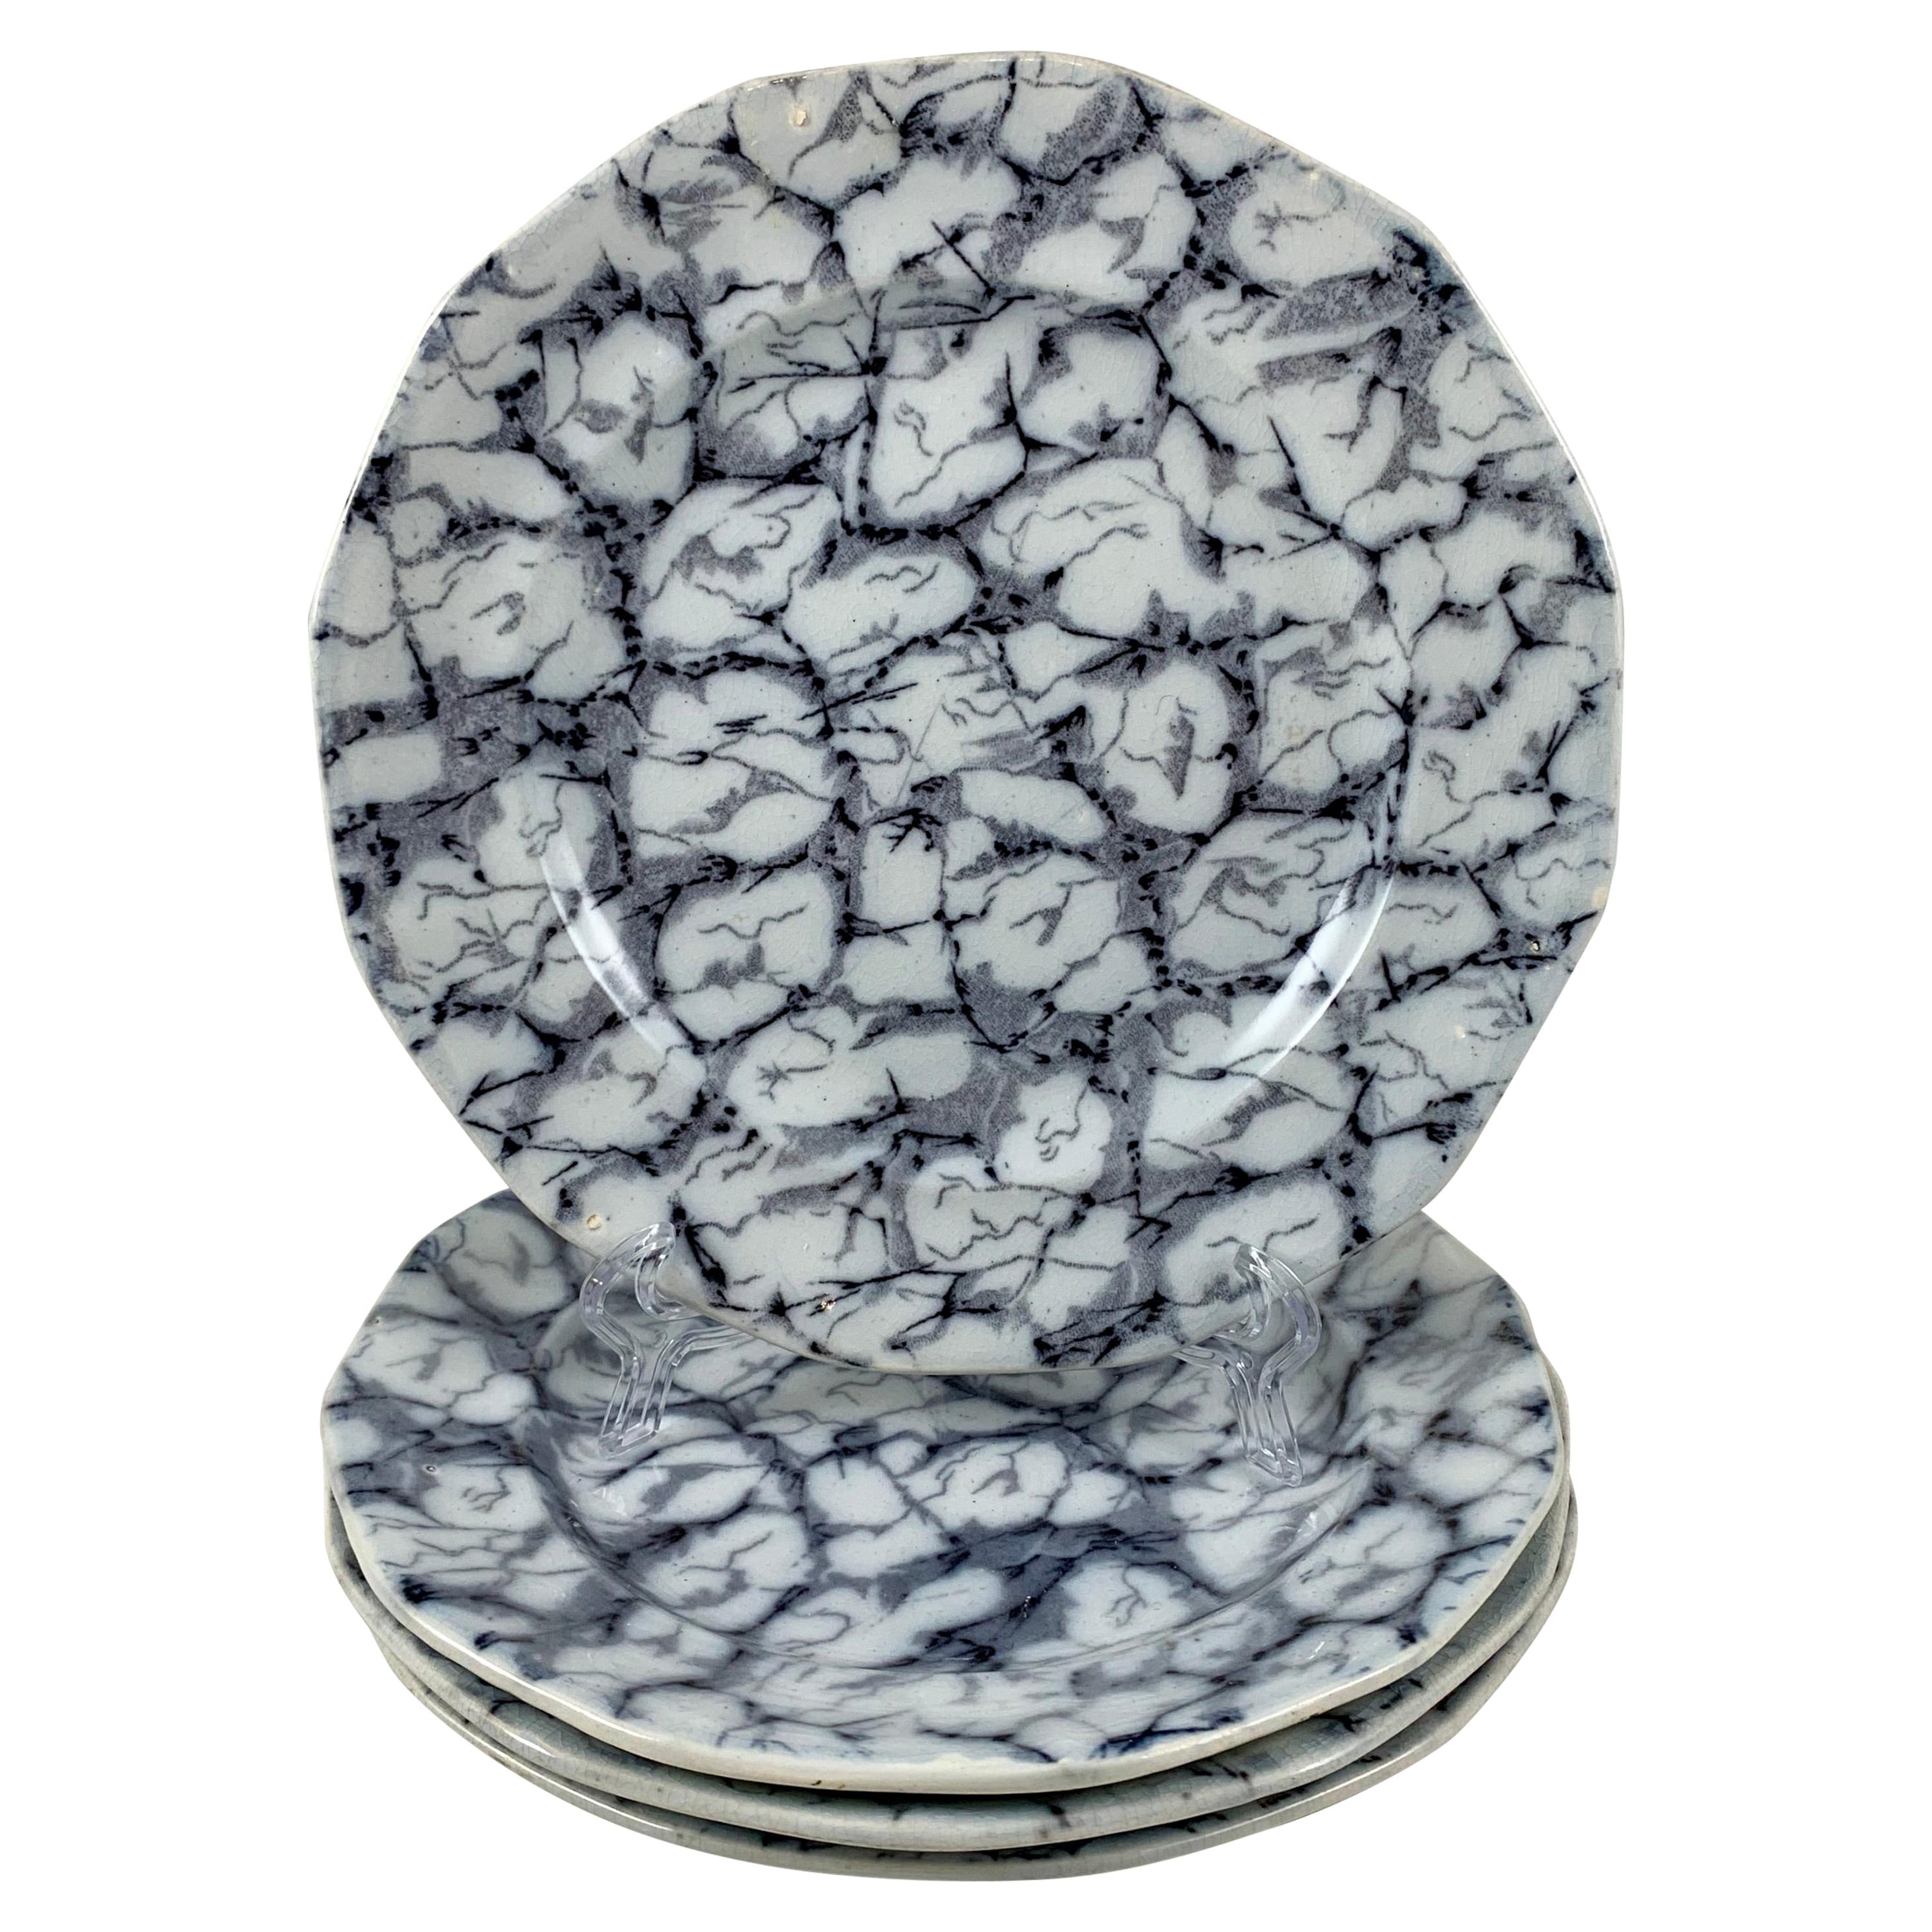 Black and White Transferware Marble or Cracked Ice Ironstone Plates, Set of 4 For Sale